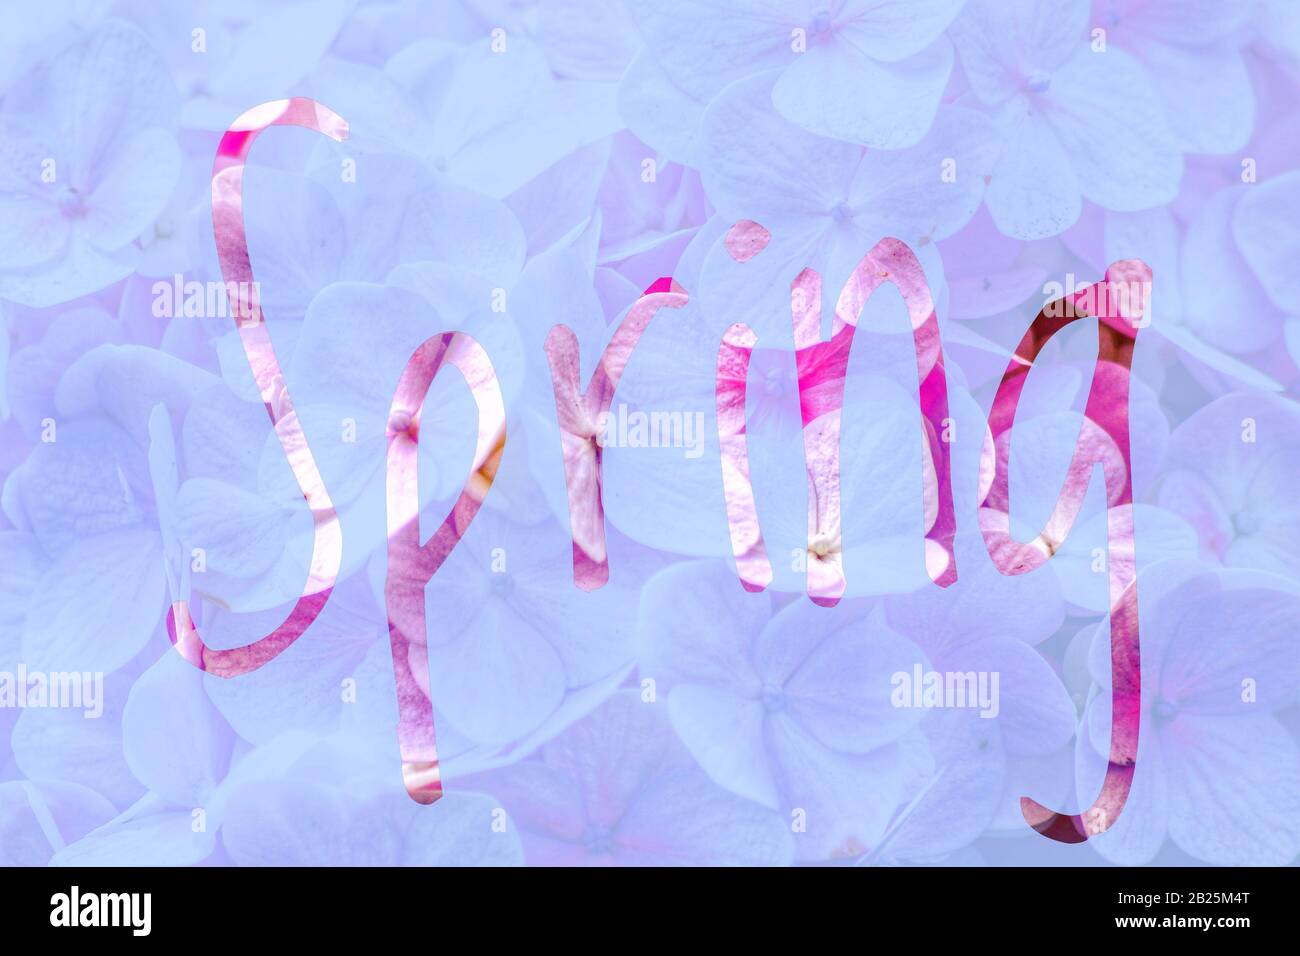 Bright and airy Spring floral text background Stock Photo